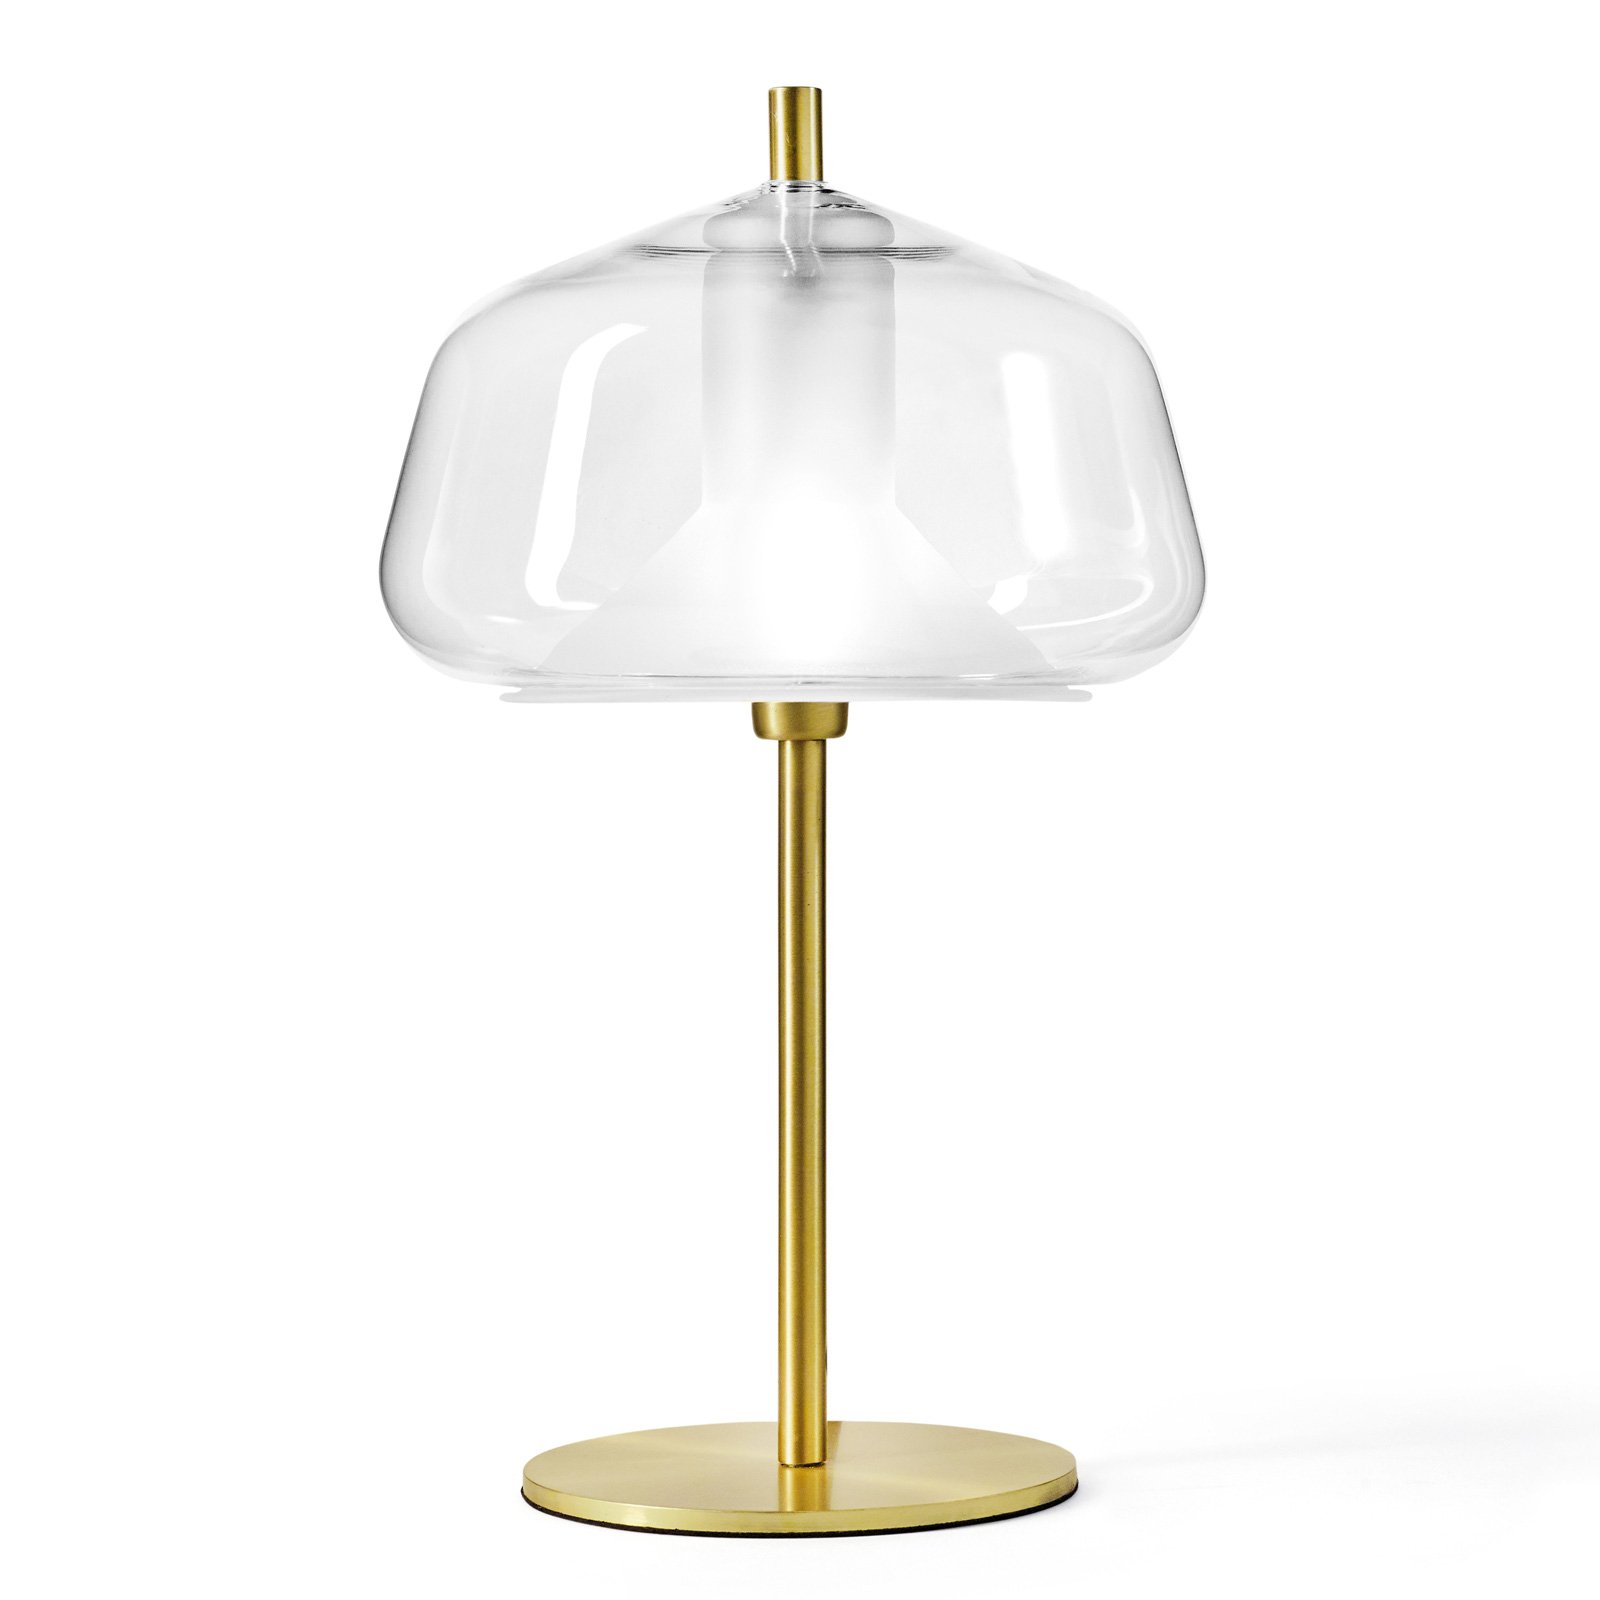 X-Ray table lamp, 12 cm high lampshade, clear